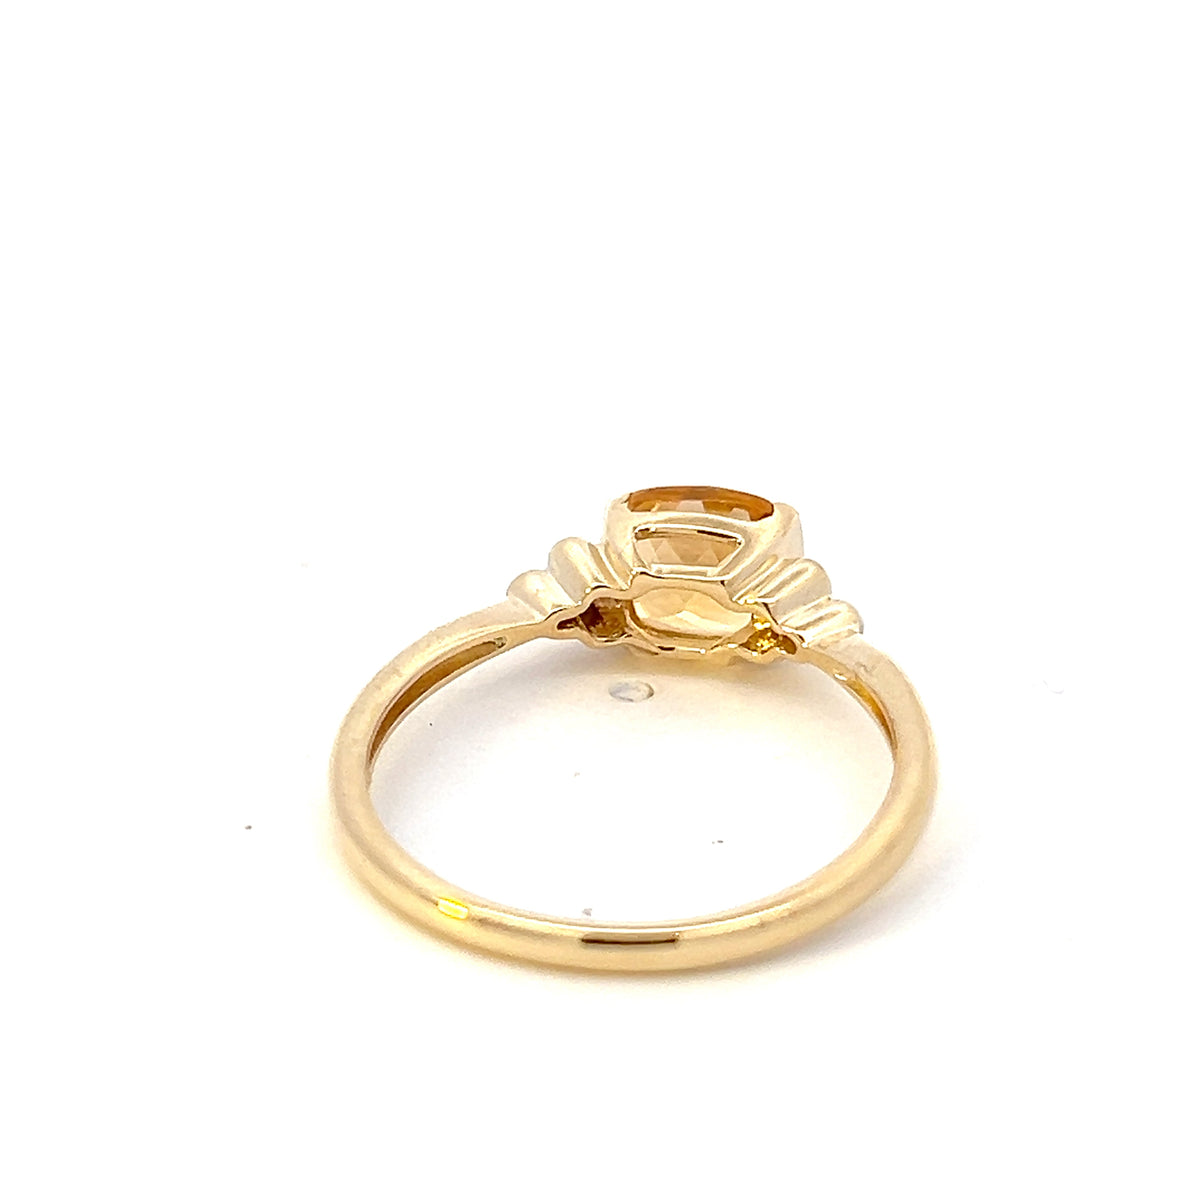 10K Yellow Gold 0.85cttw Citrine and 0.03cttw Diamond Ring - Size 7